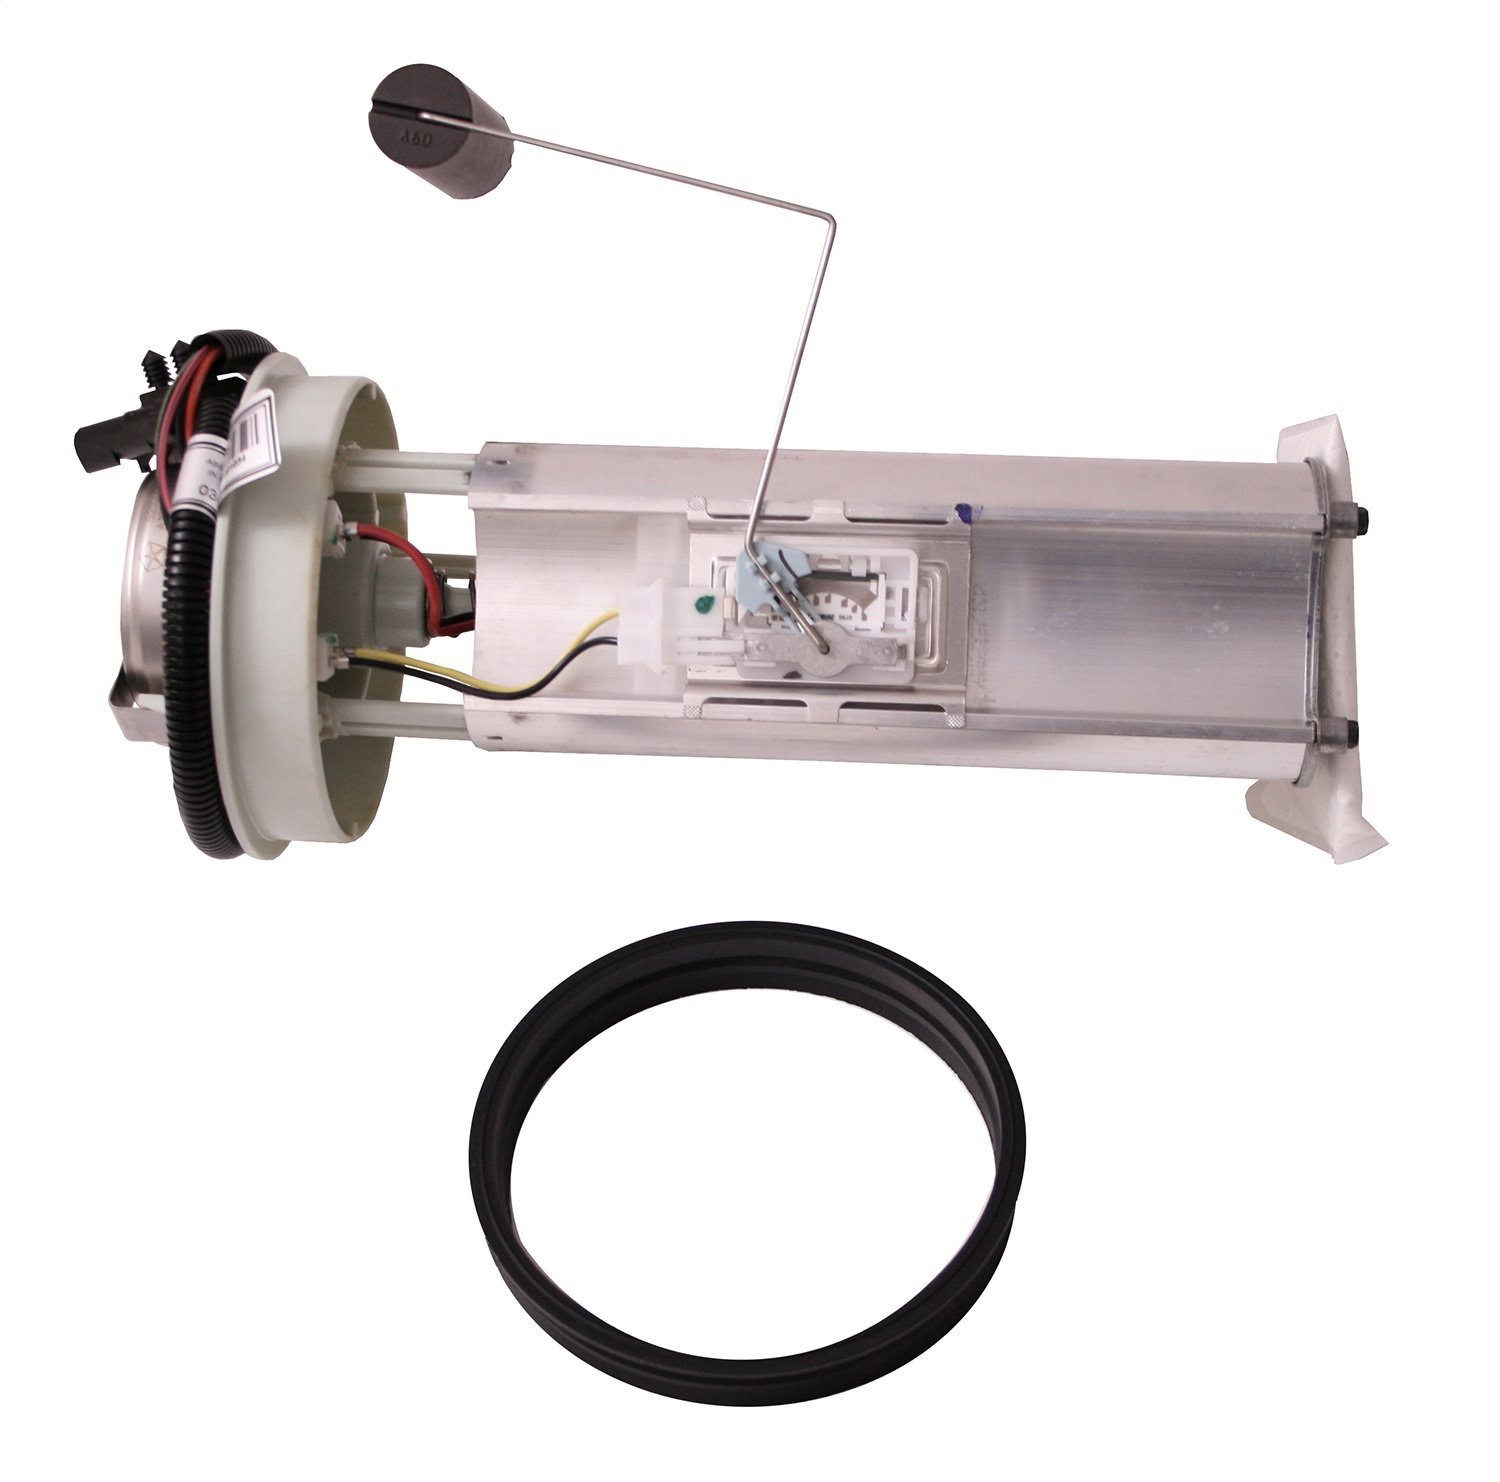 Replacement fuel pump module from Omix-ADA, Fits 91-93 Jeep Cherokees XJ with 2.5L engine.